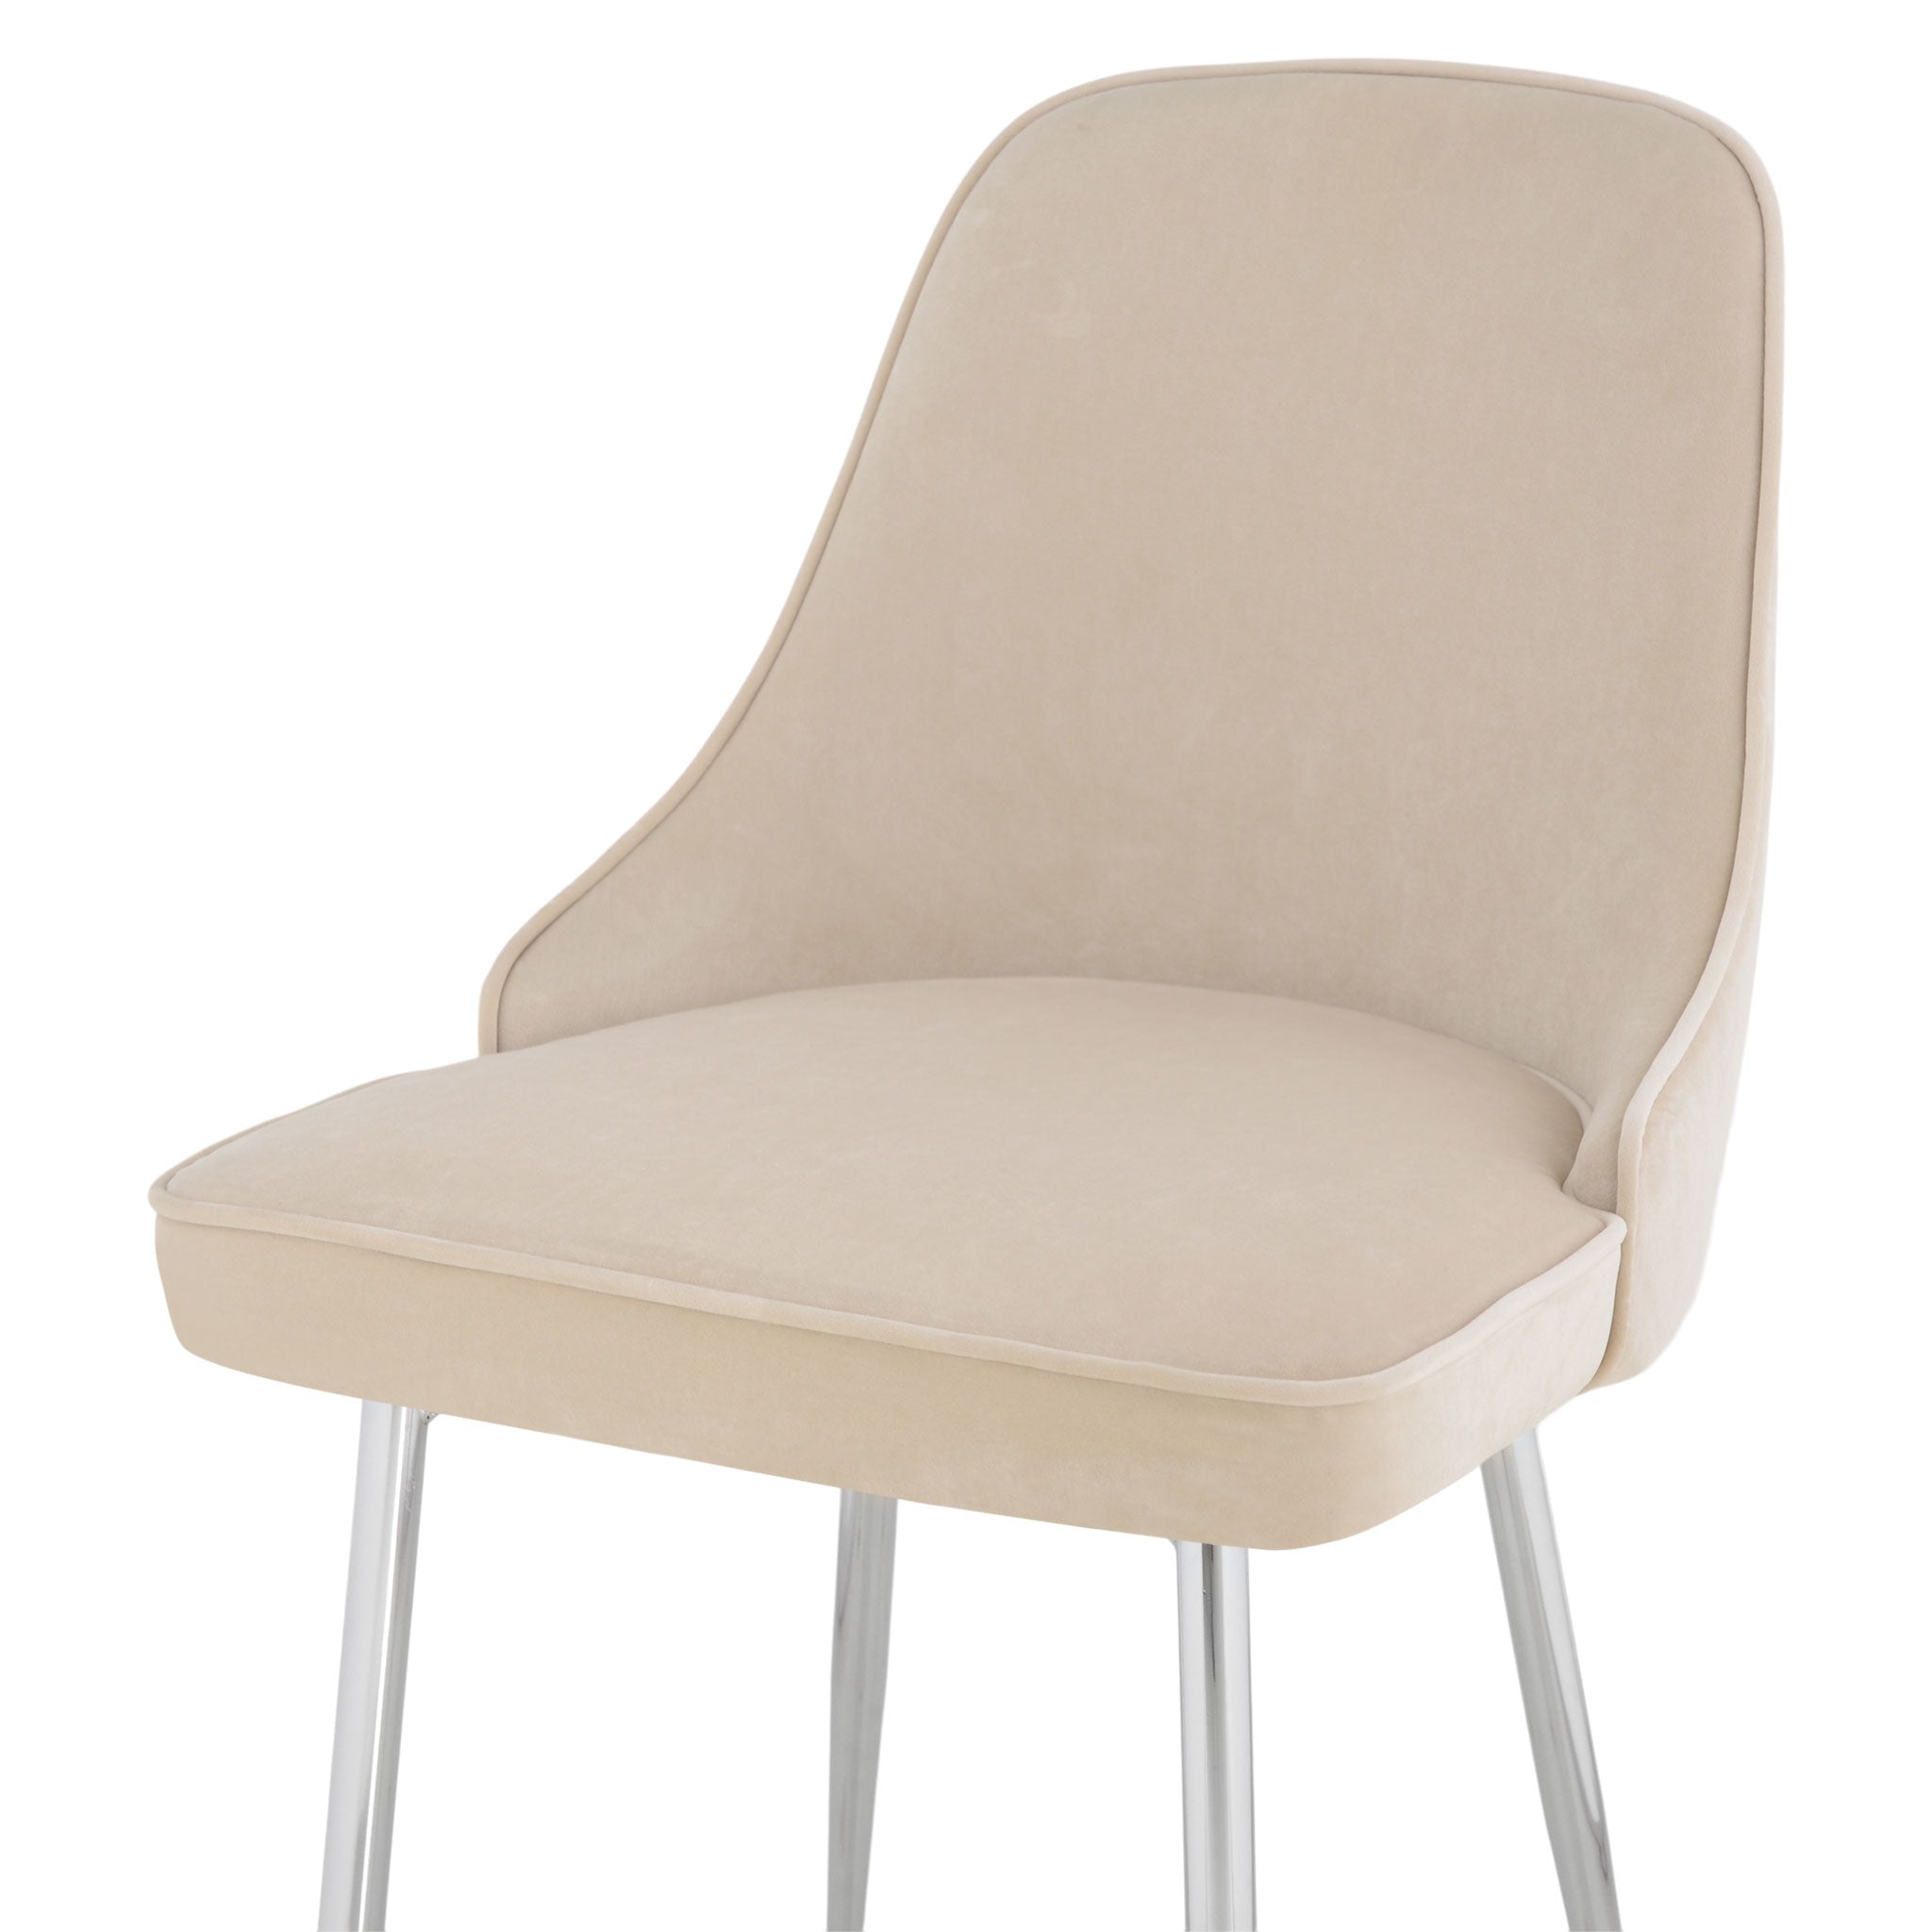 FONDHOUSE Yink Chair